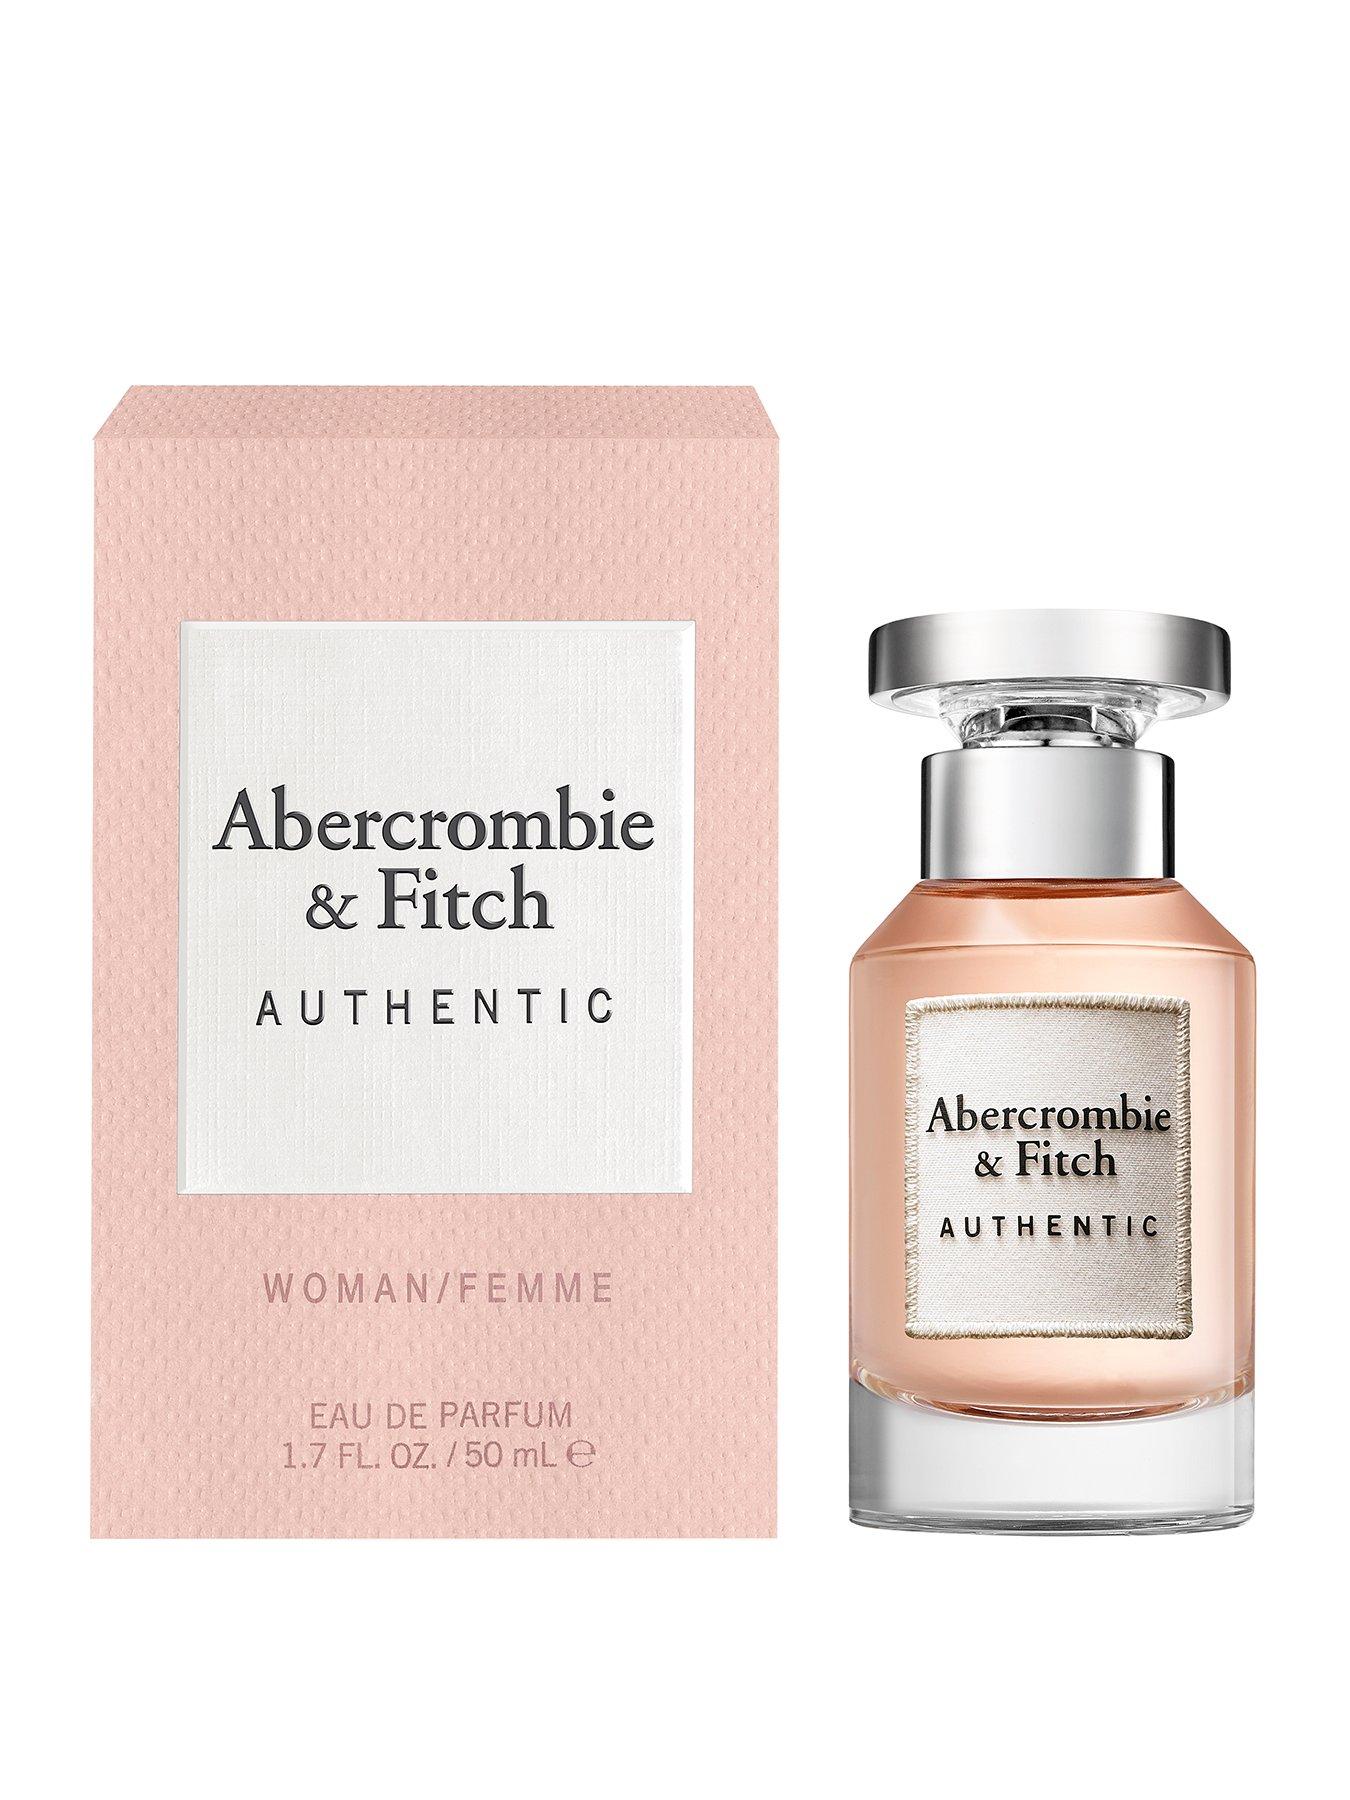 Аберкромби духи. Abercrombie Fitch authentic woman 50 ml. Abercrombie Fitch away духи женские. Abercrombie Fitch authentic for her. Abercrombie Fitch 30ml женские.